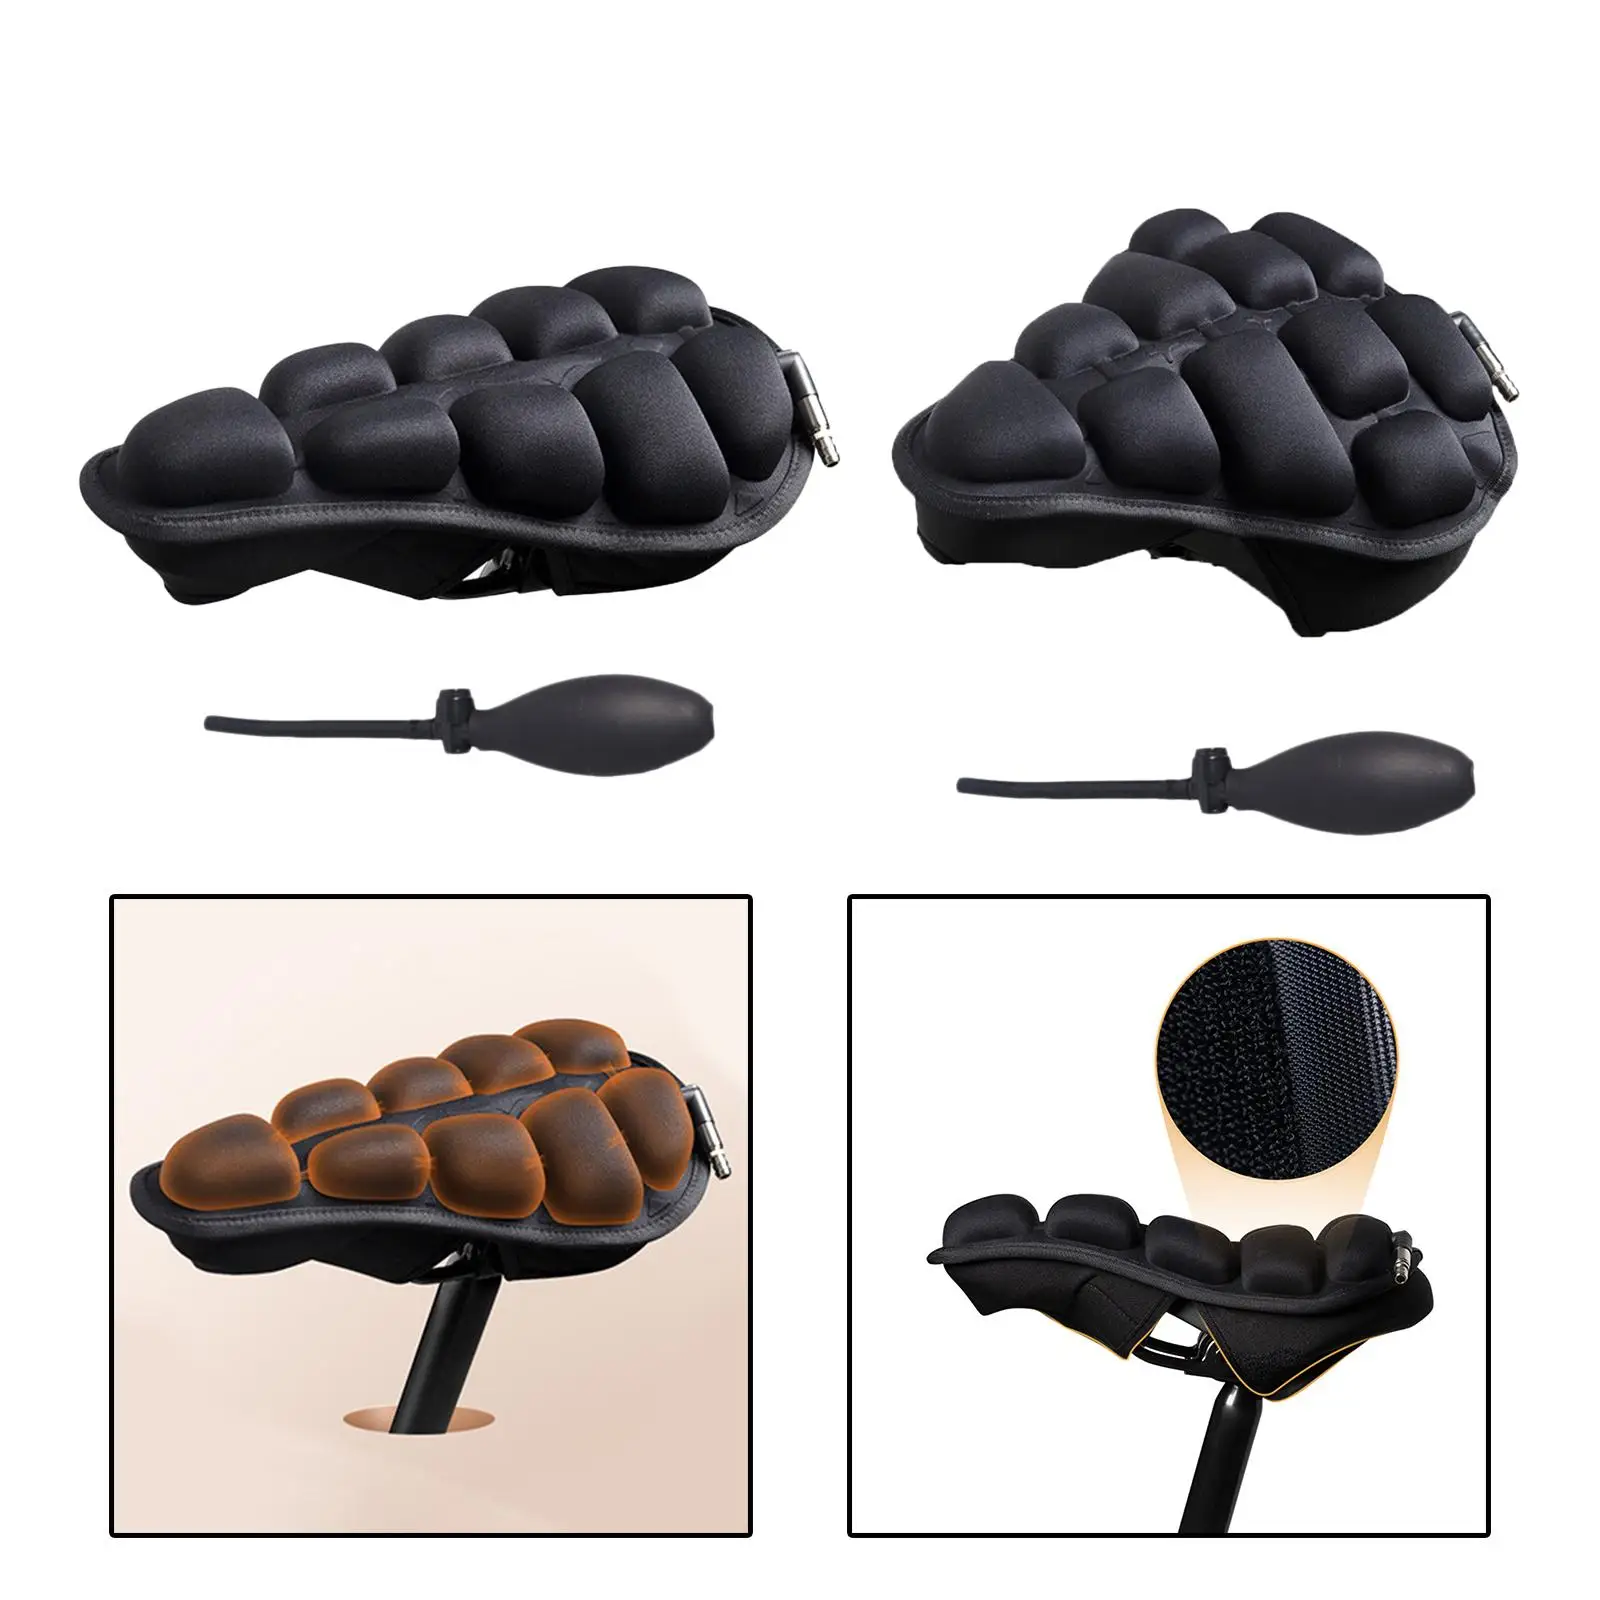 Comfort Bike Seat Cushion Cover, 3D Bike Saddle Cover, Breathable Inflatable